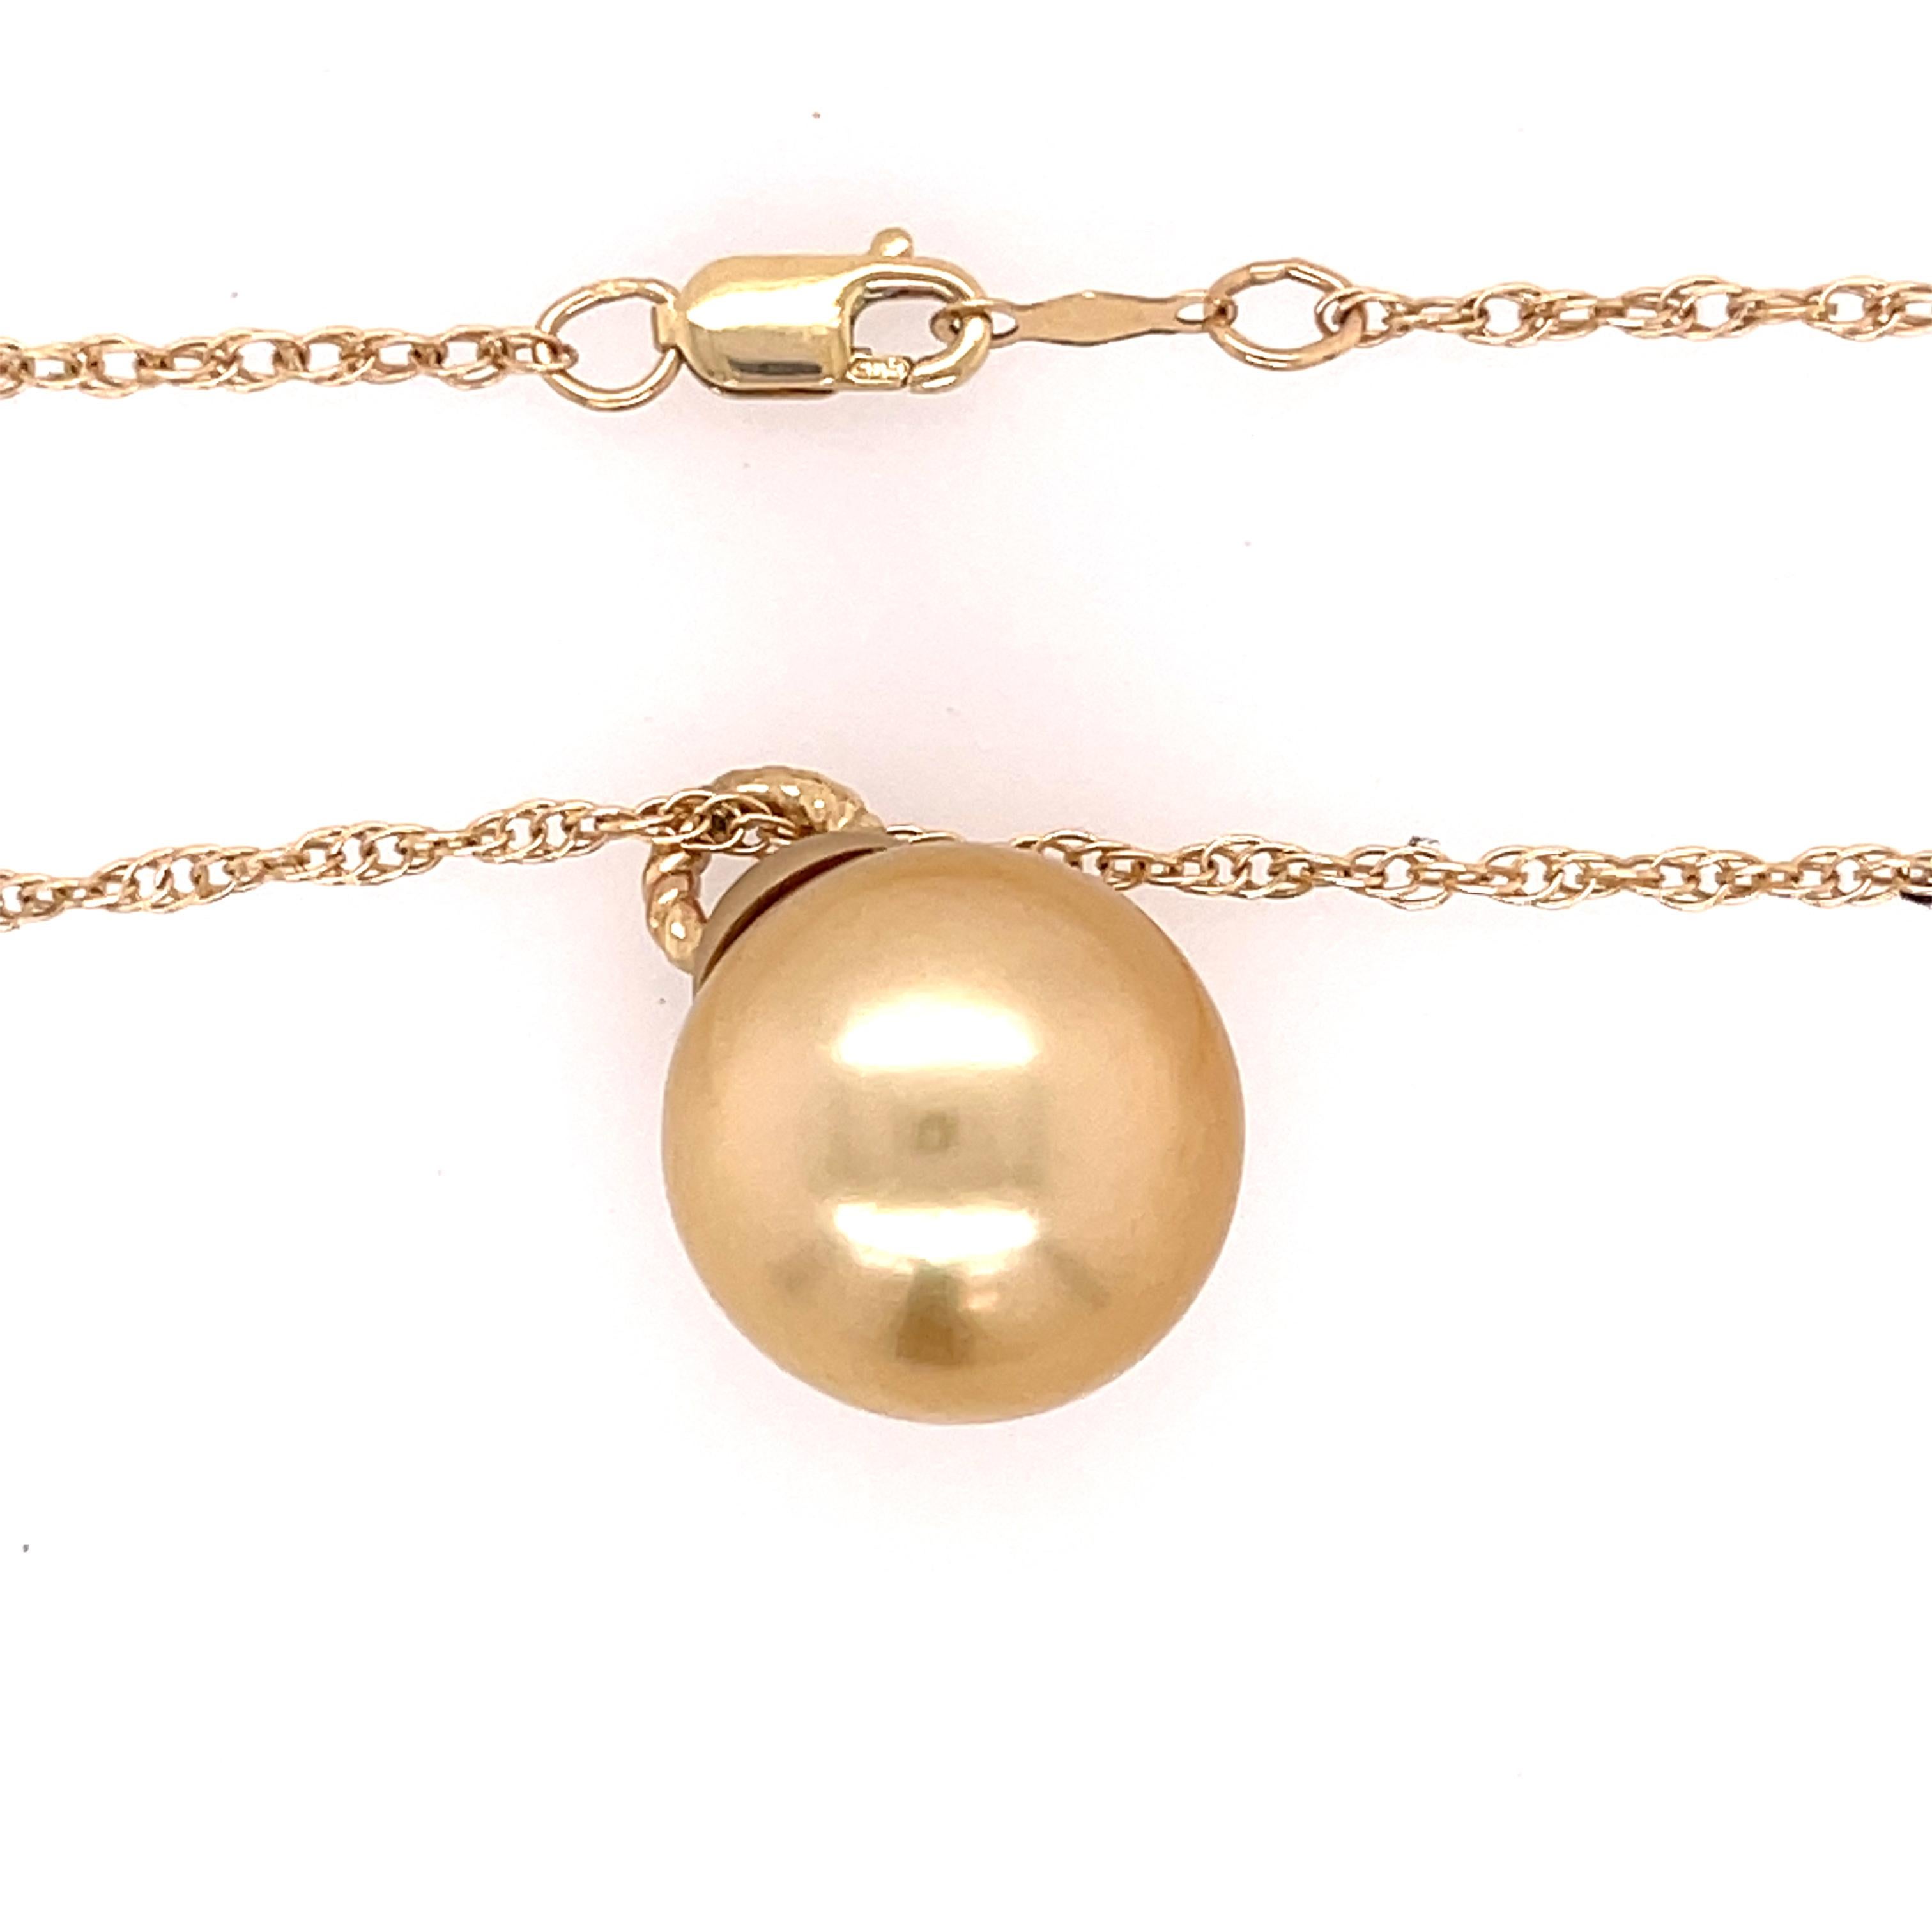 Gold South Sea pearl pendant on a 14k yellow gold chain. The pearl is 13.50mm in width on a 18 inch rope chain. Stamped 14k.